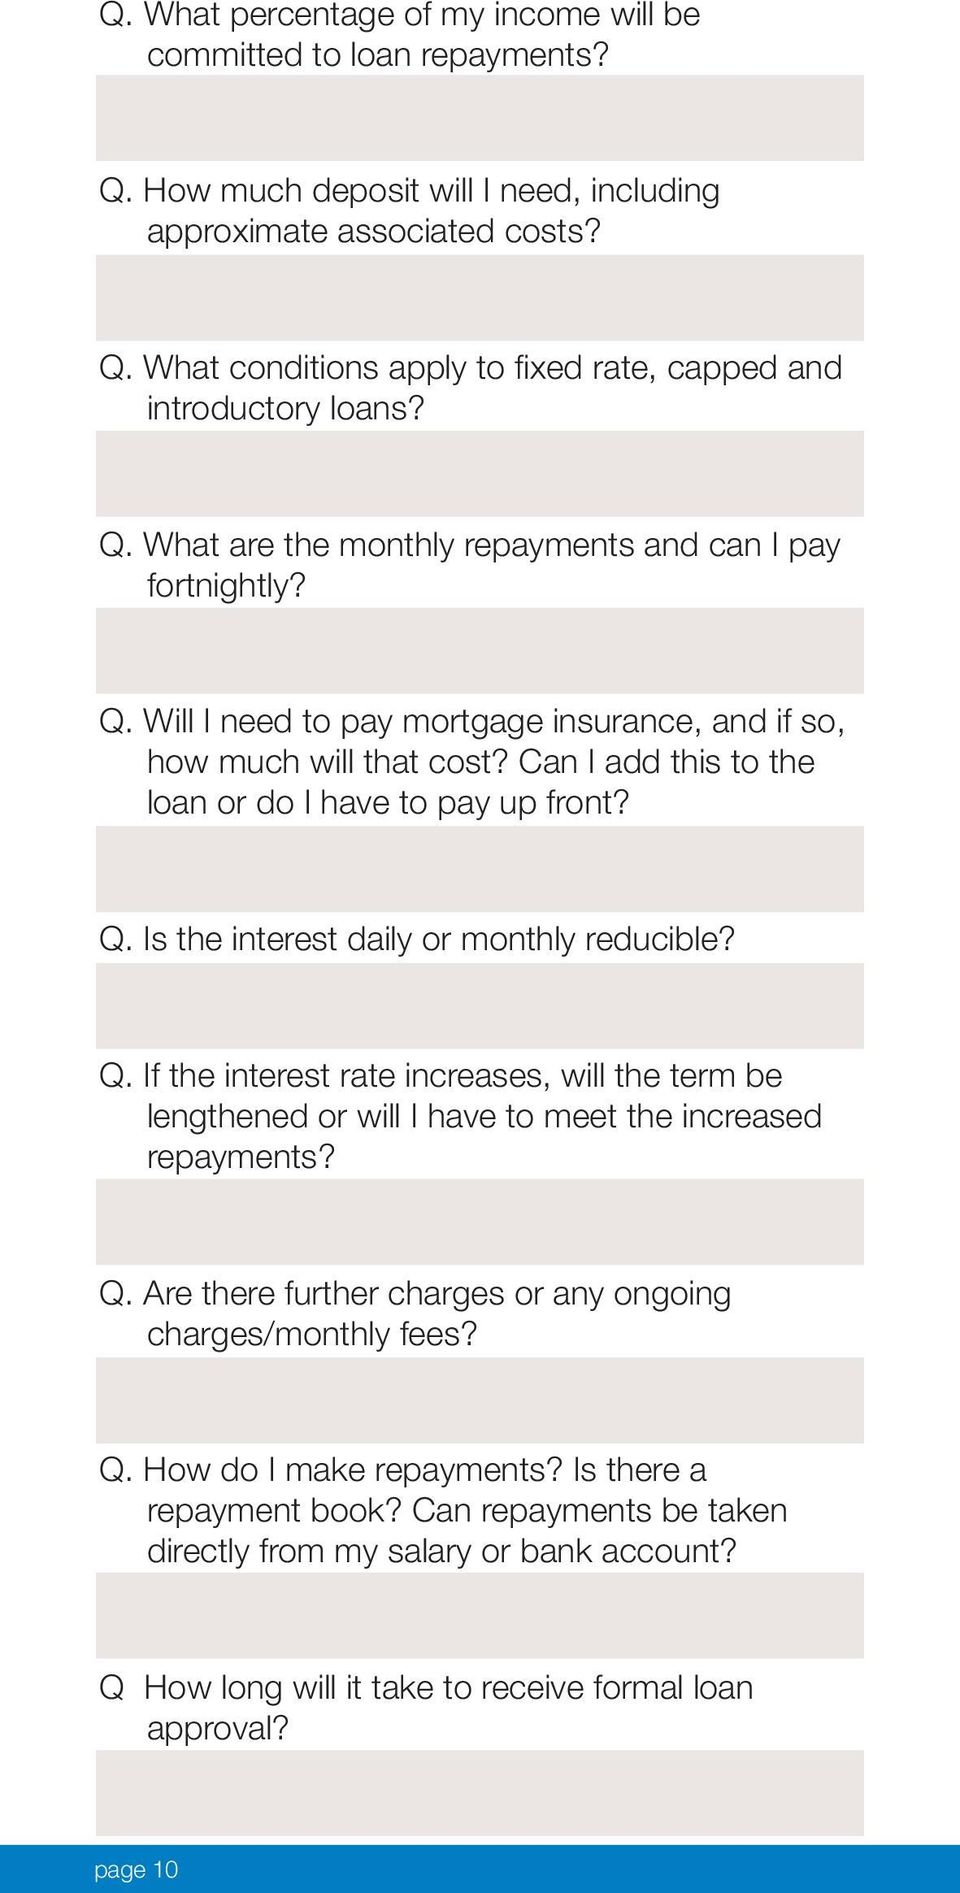 Q. If the interest rate increases, will the term be lengthened or will I have to meet the increased repayments? Q. Are there further charges or any ongoing charges/monthly fees? Q. How do I make repayments?